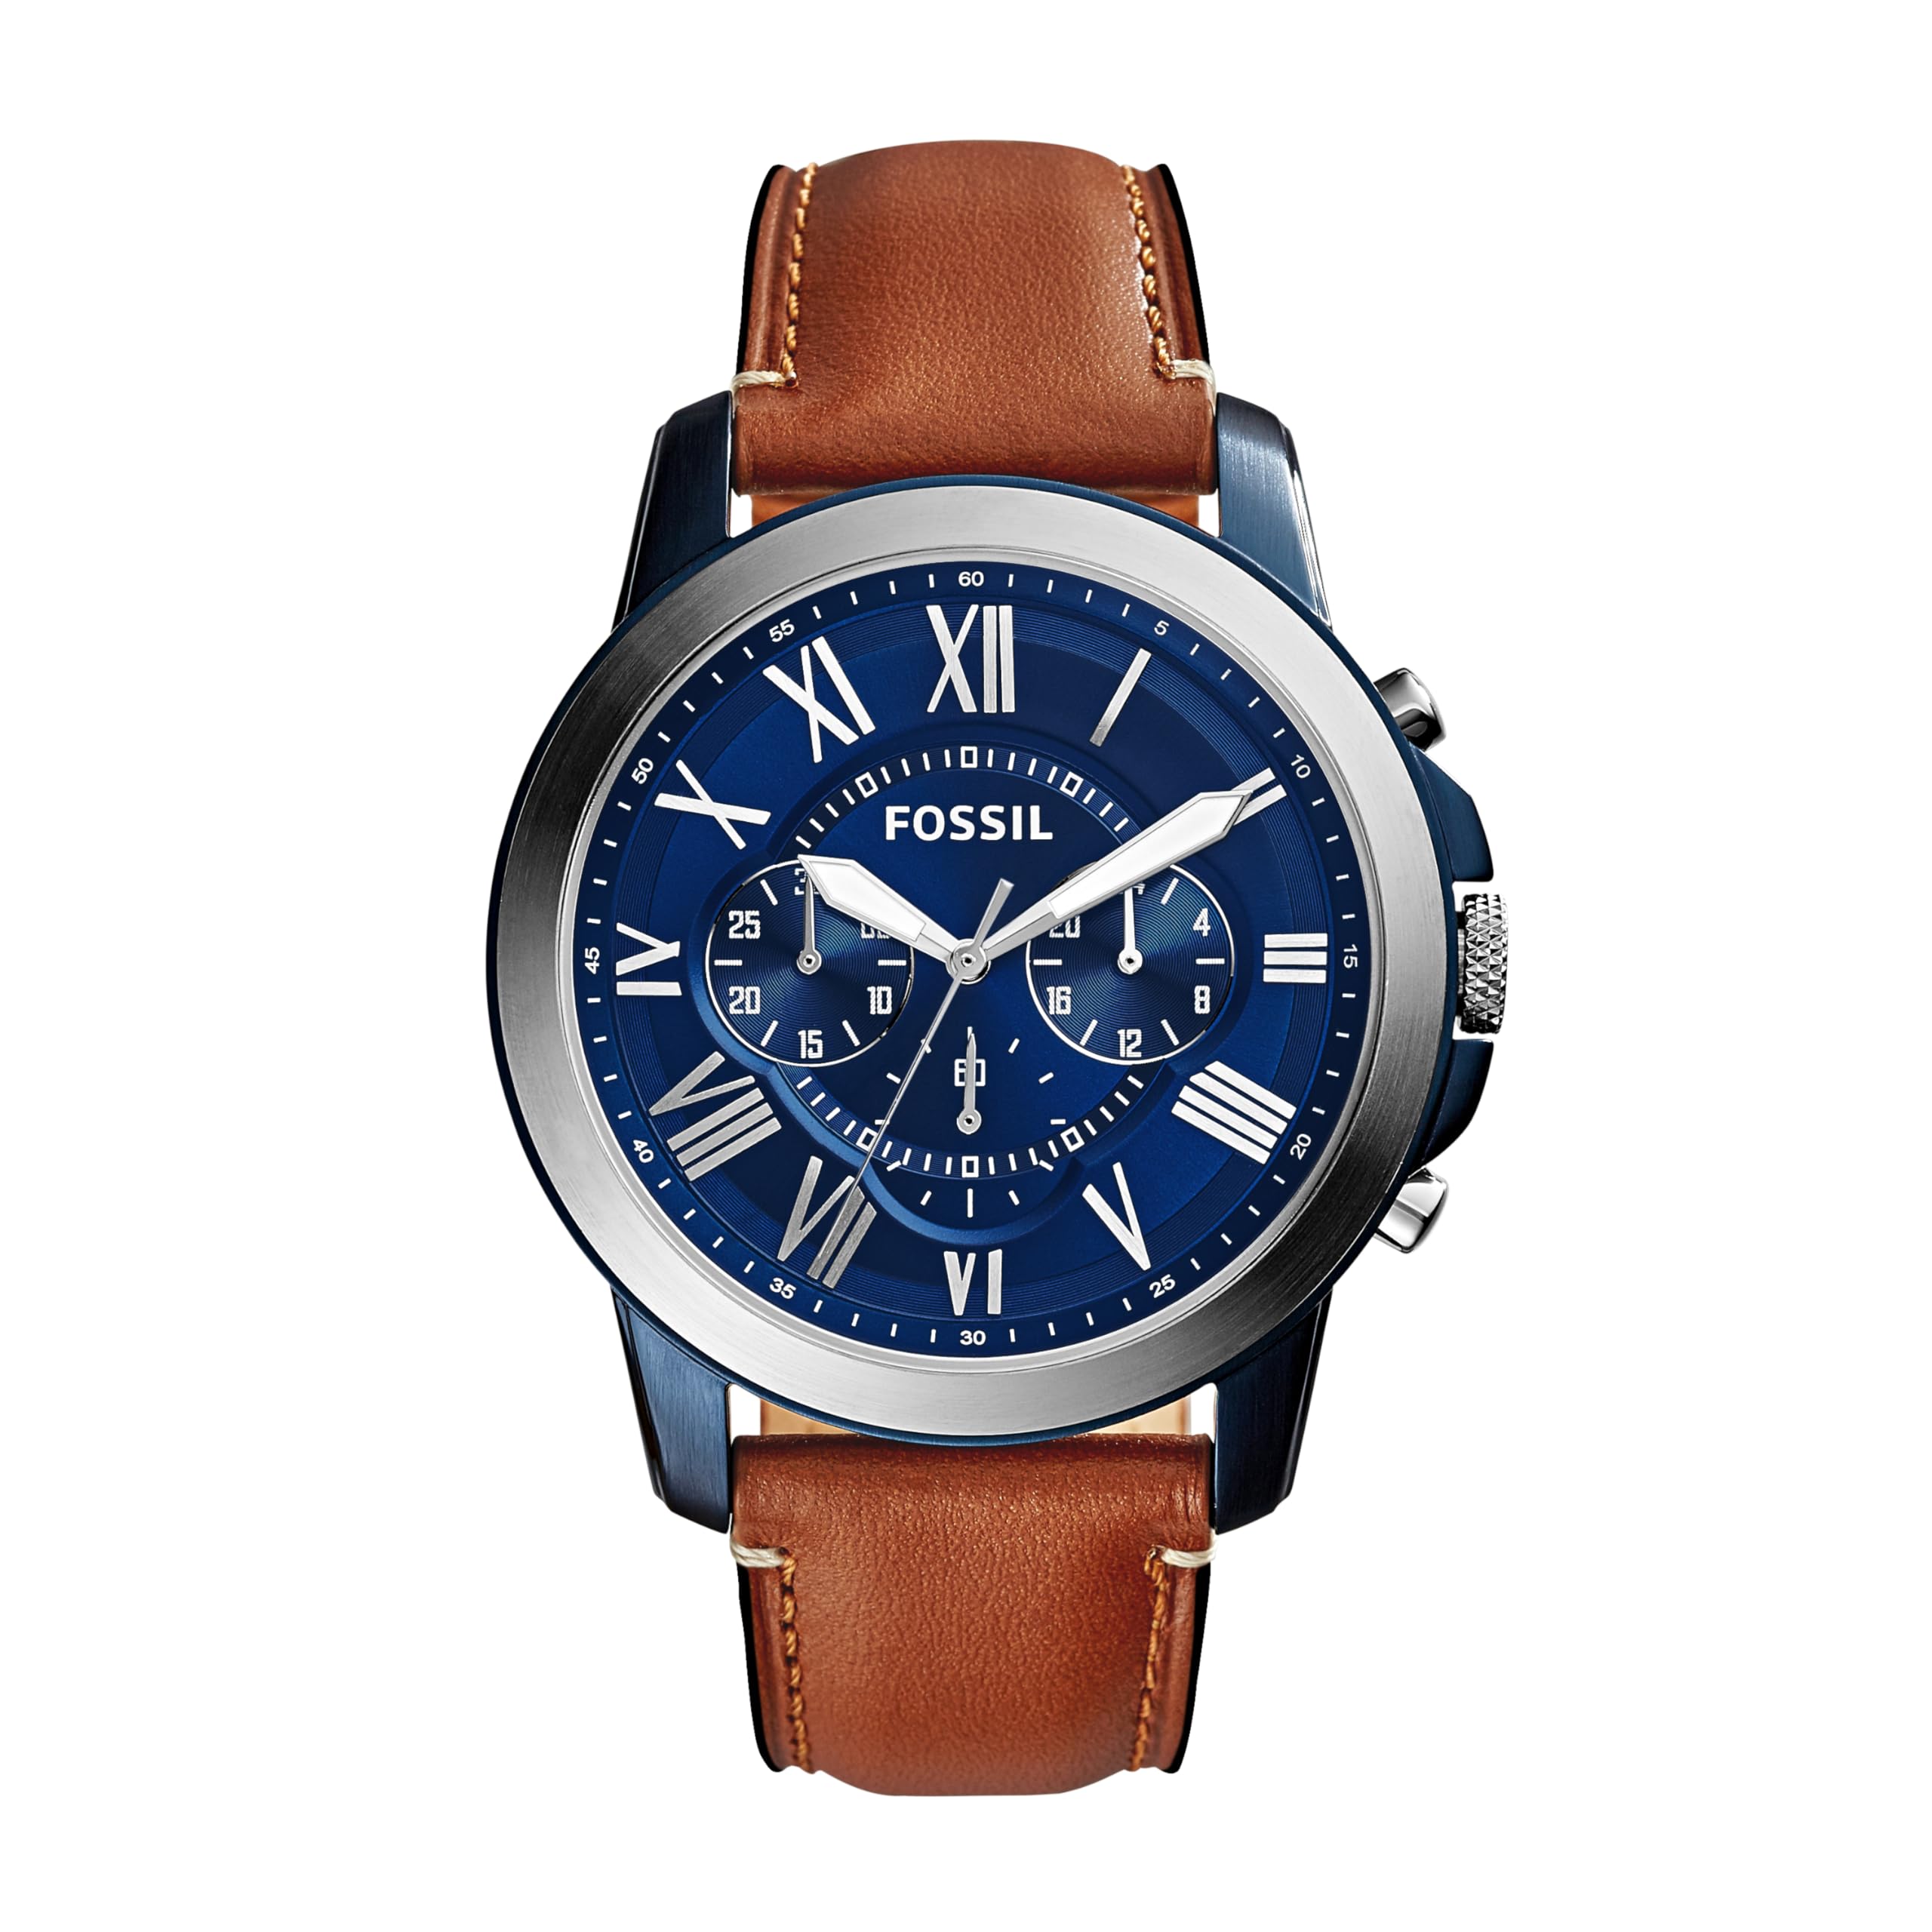 Fossil Men's Grant Quartz Stainless Steel and Leather Chronograph Watch, (Silver/Blue)  $78.19 + Free Shipping